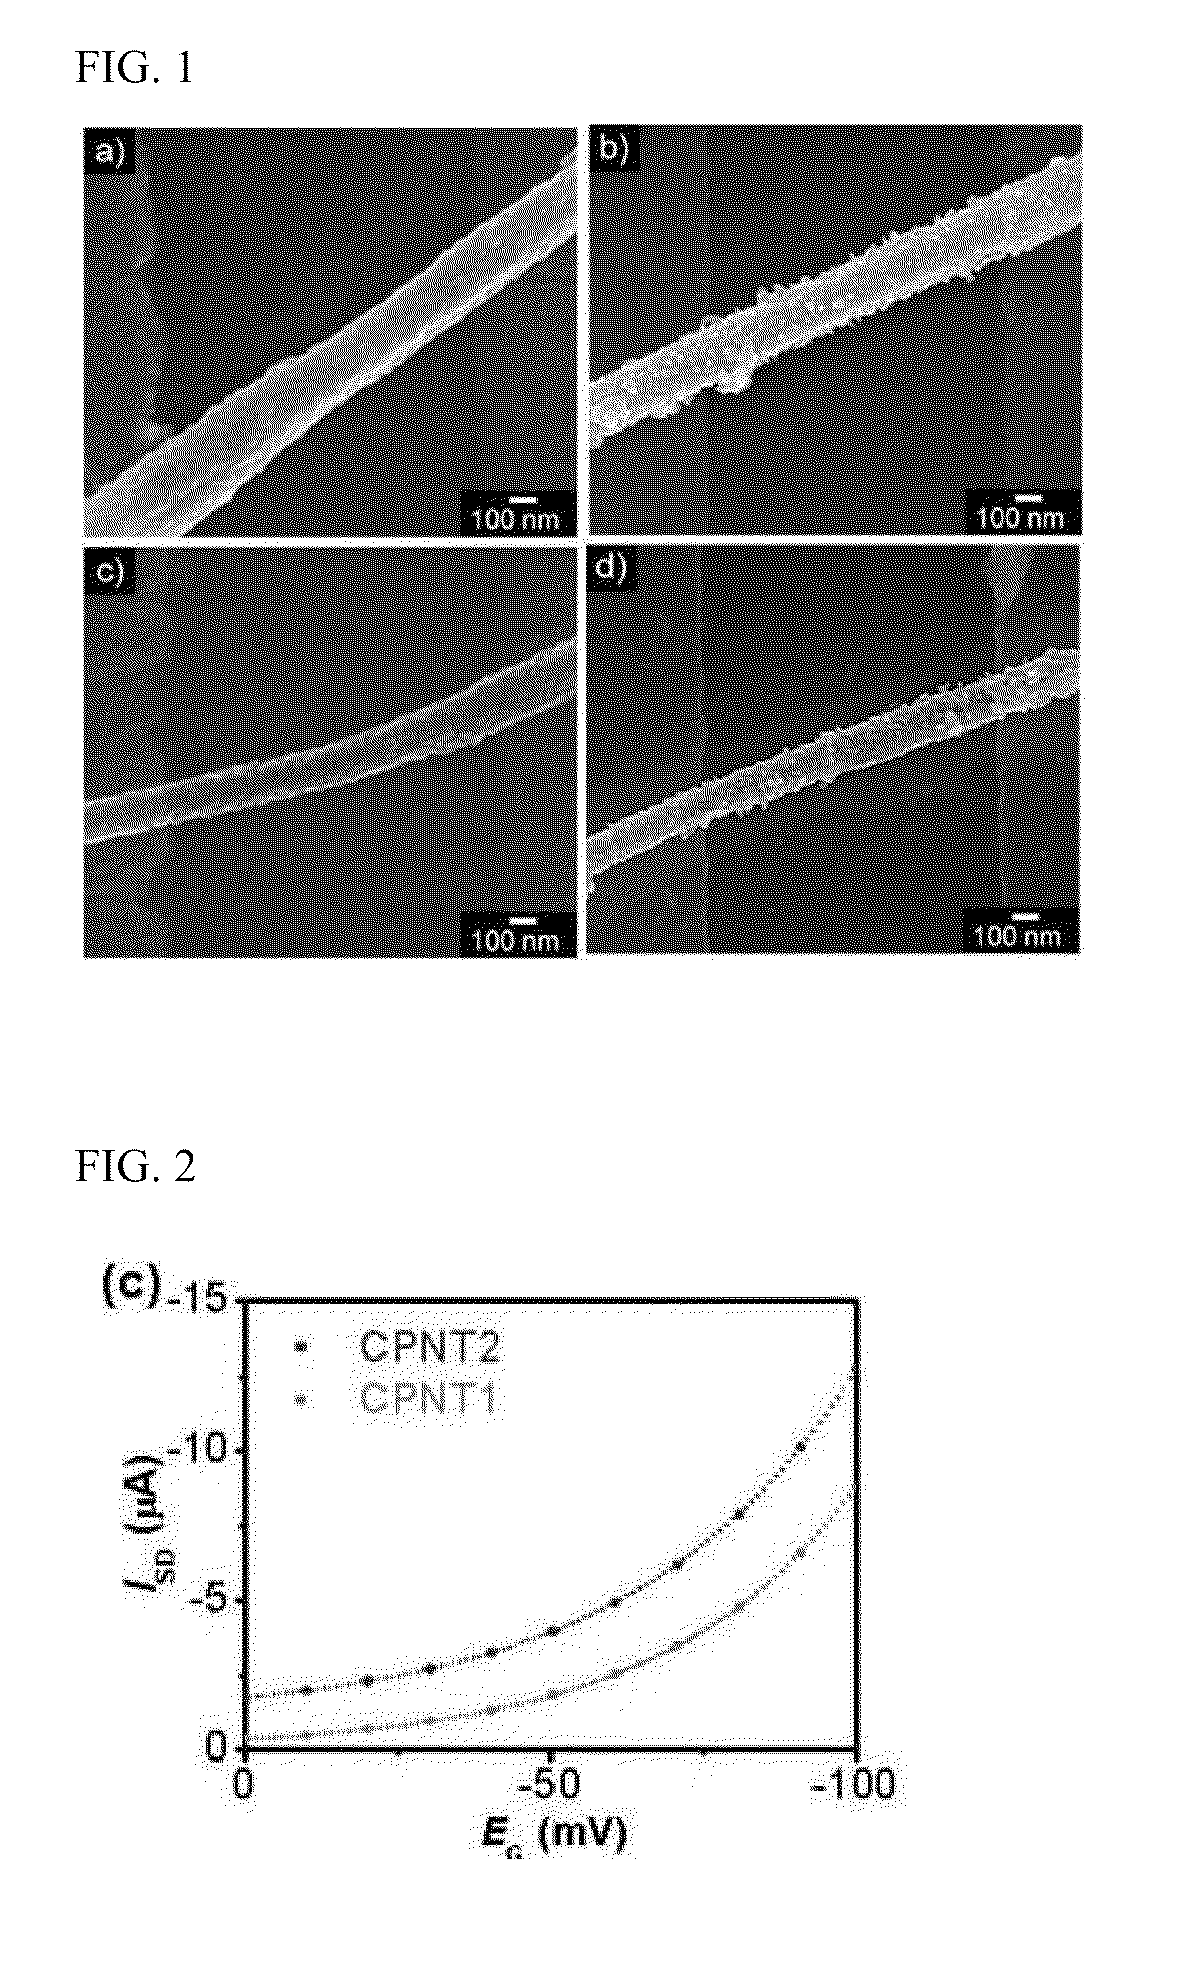 Method for fabricating novel high-performance field-effect transistor biosensor based on conductive polymer nanomaterials functionalized with anti-VEGF adapter